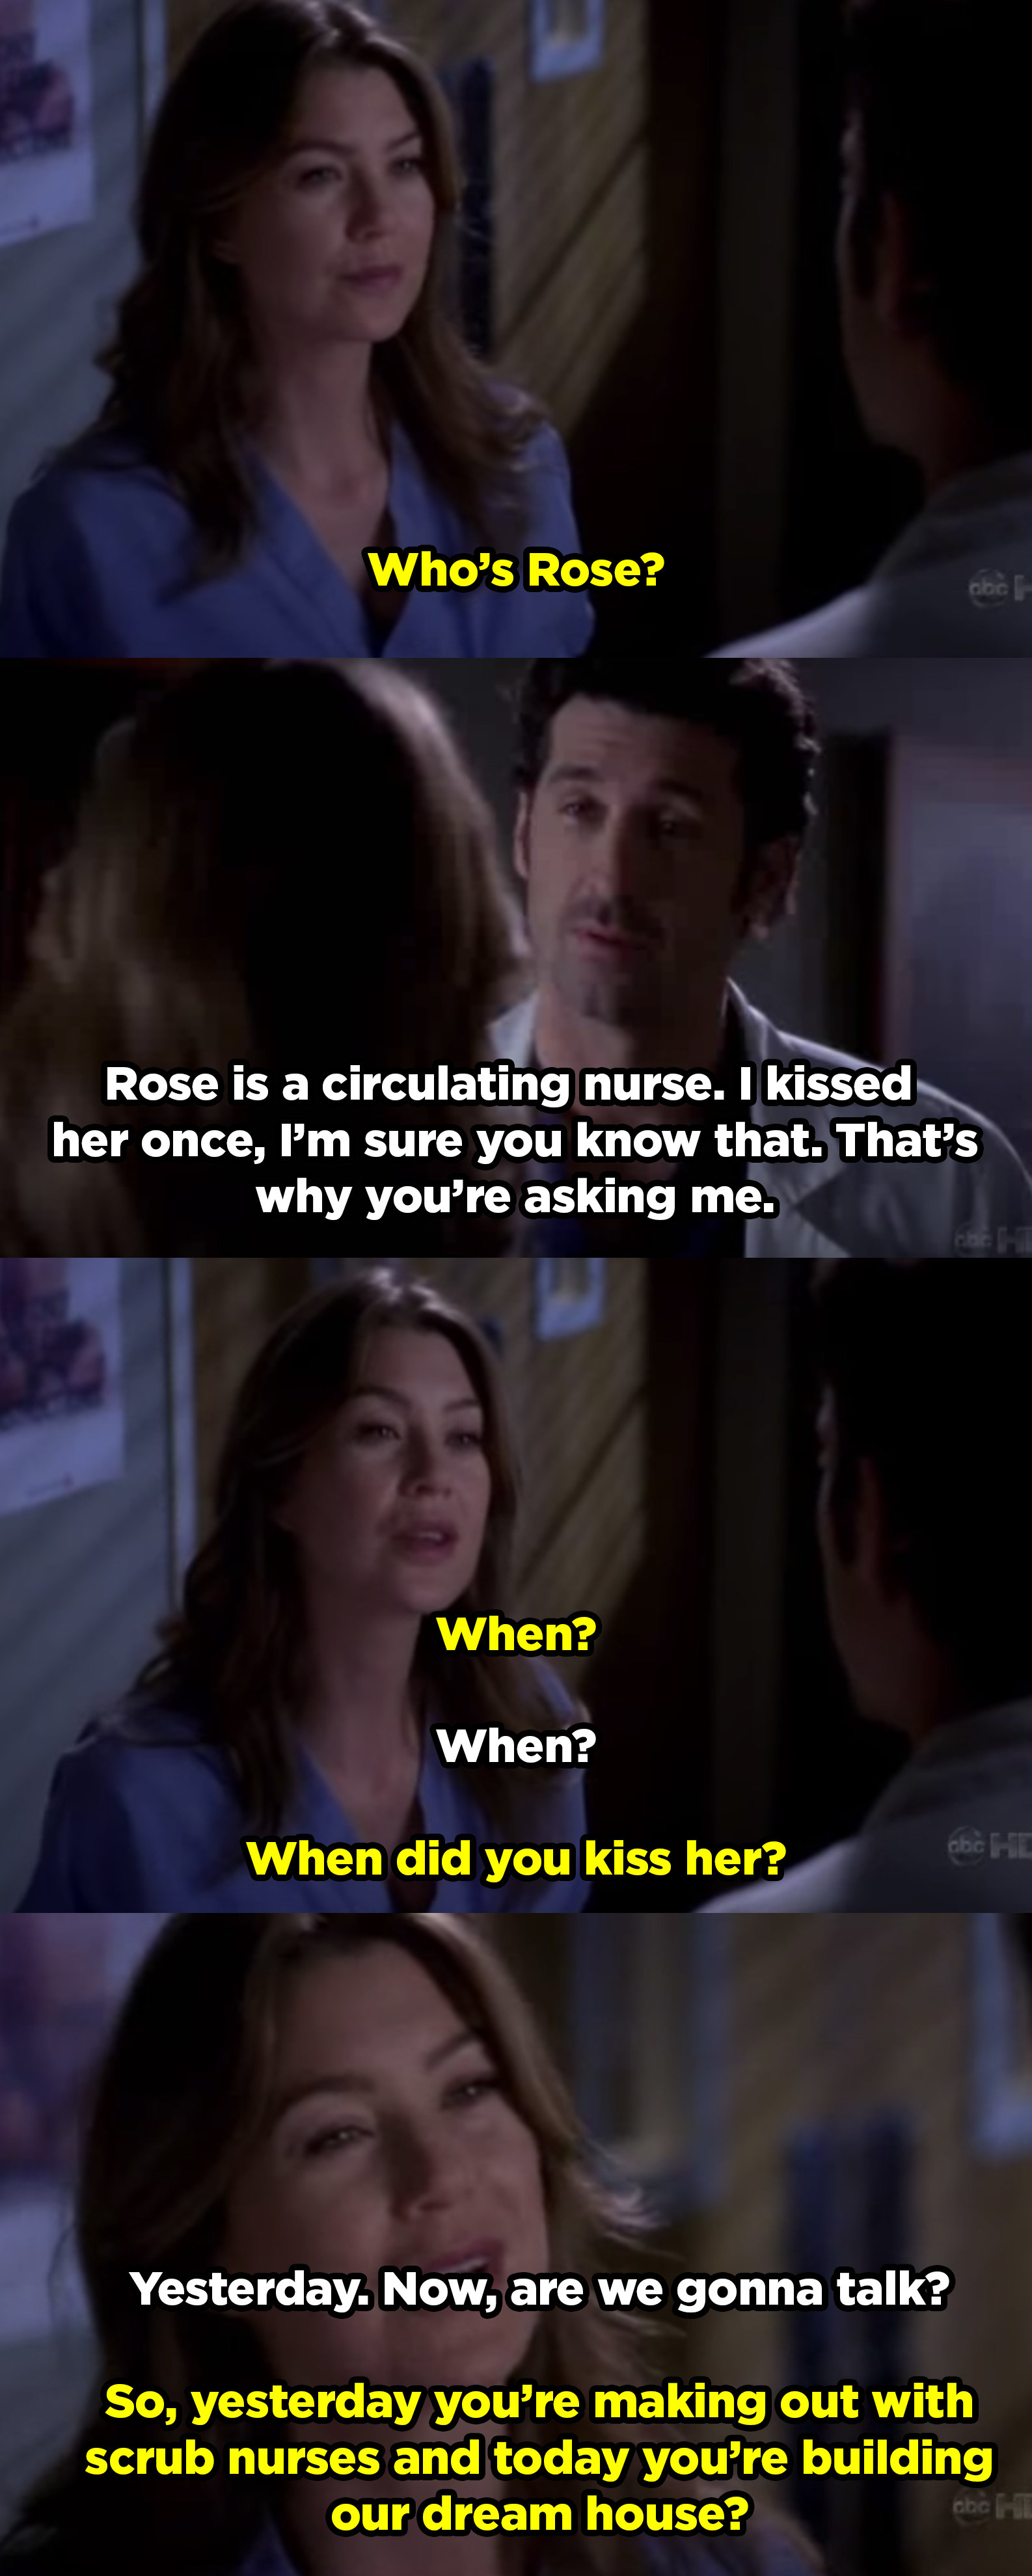 Meredith and Derek having a fight in the hospital. She found out about him kissing a nurse named Rose after he&#x27;d told Meredith he was building their dream house.